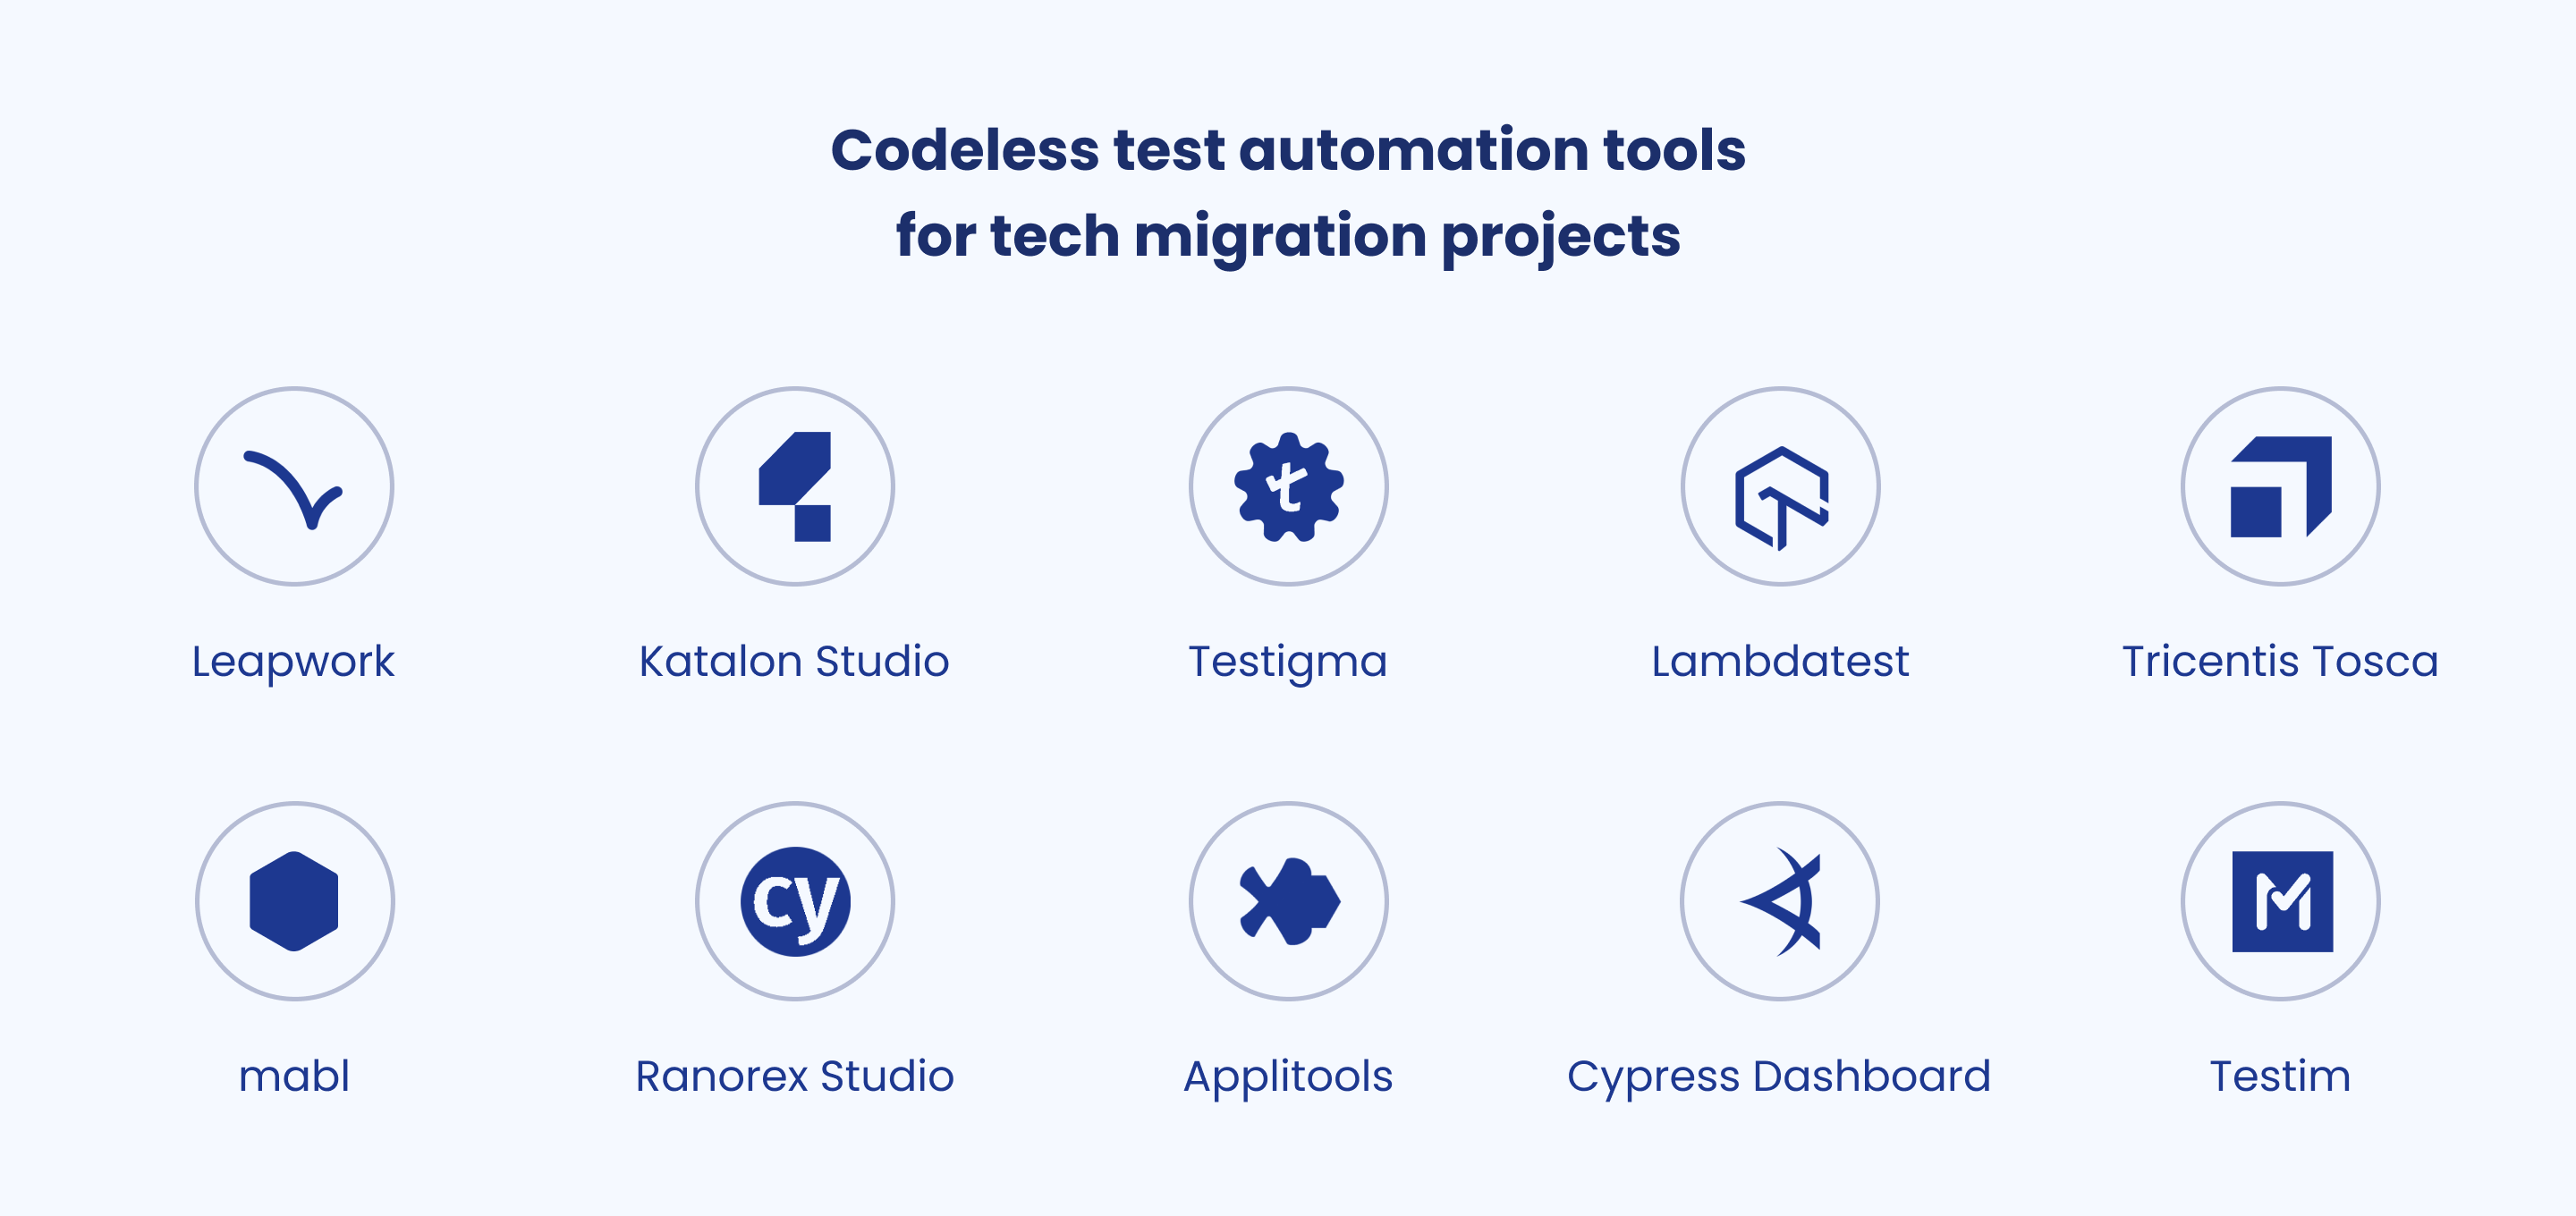 Codeless test automation tools